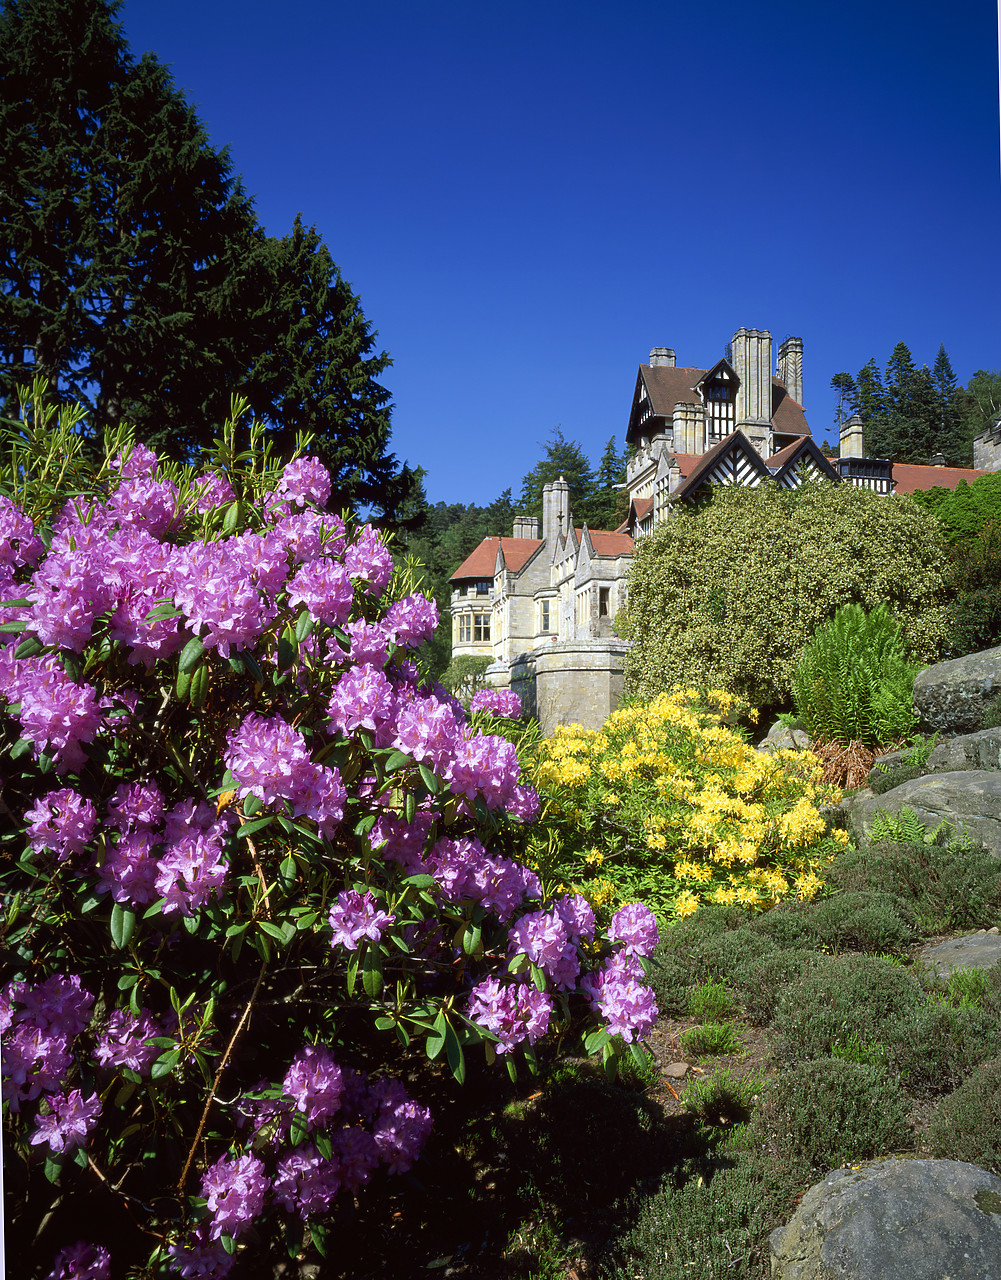 #966083-4 - Cragside House in Spring, Rothbury, Northumberland, England